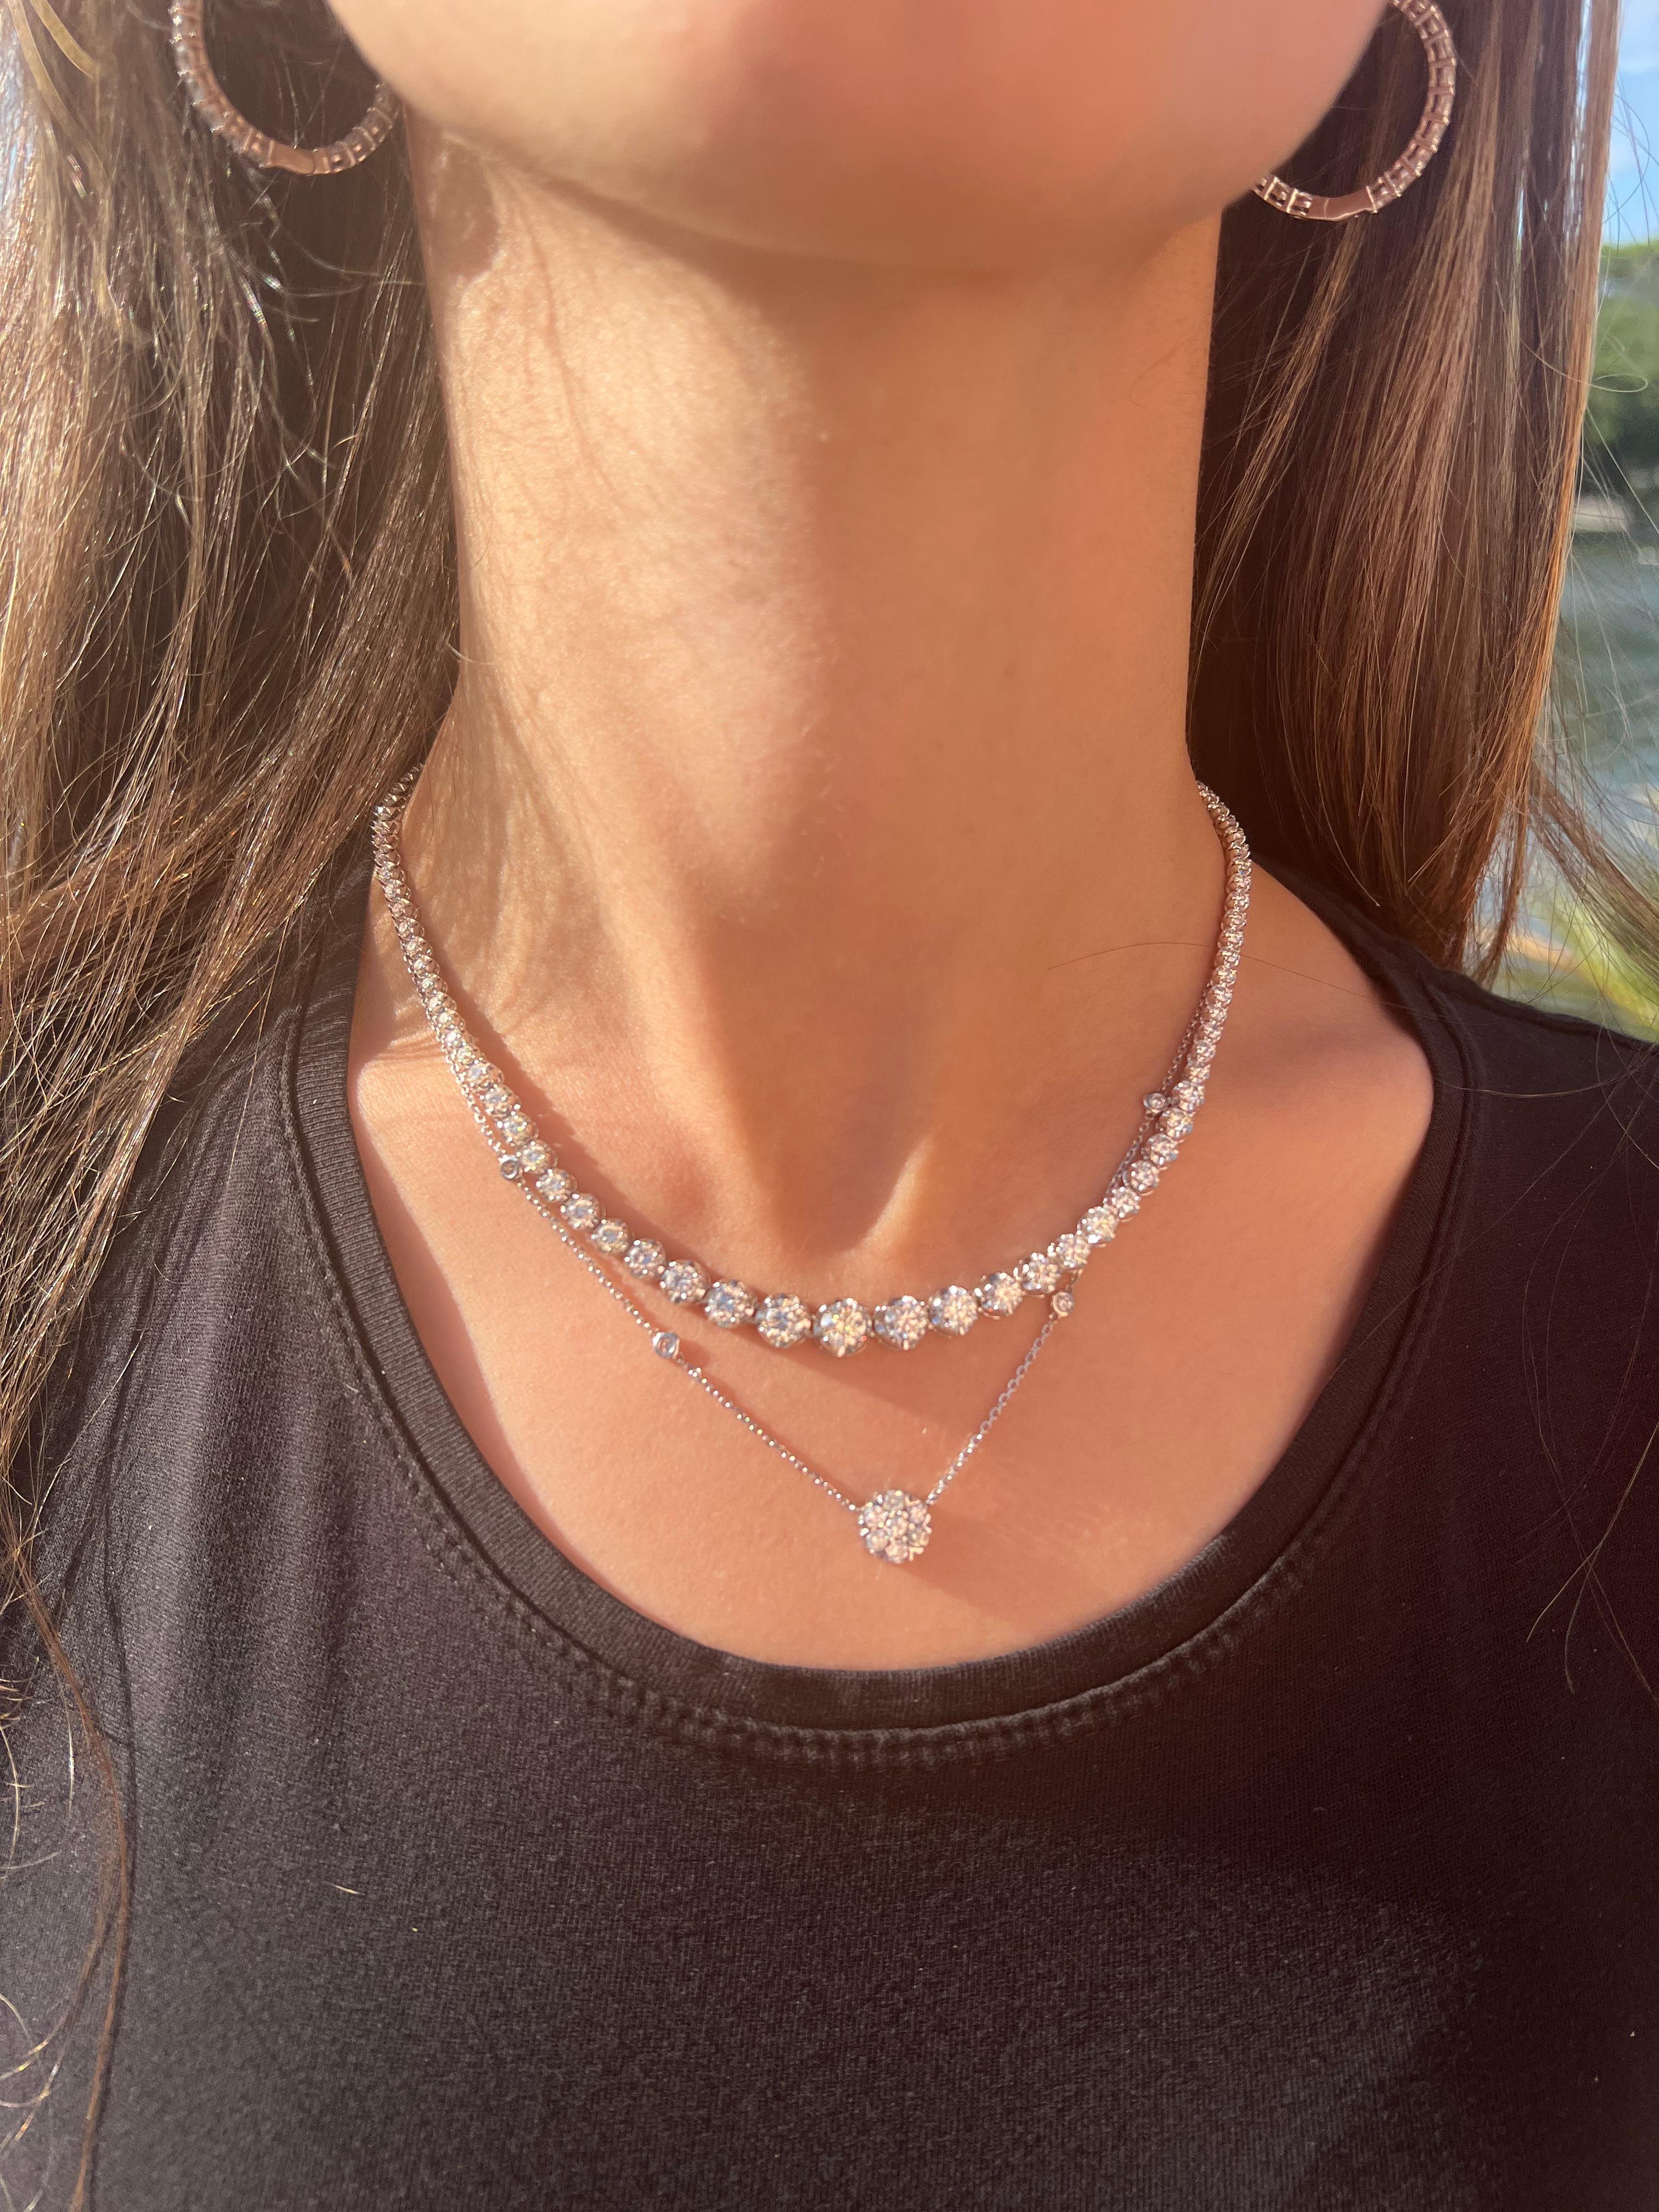 This unique 10.23ct Graduated Diamond Tennis Necklace is a Head turner. Each diamond is set in a crown prong setting giving off maximum brilliance and shine. the Center stone is the largest diamond ( .70ct) then it continues up the neck with smaller